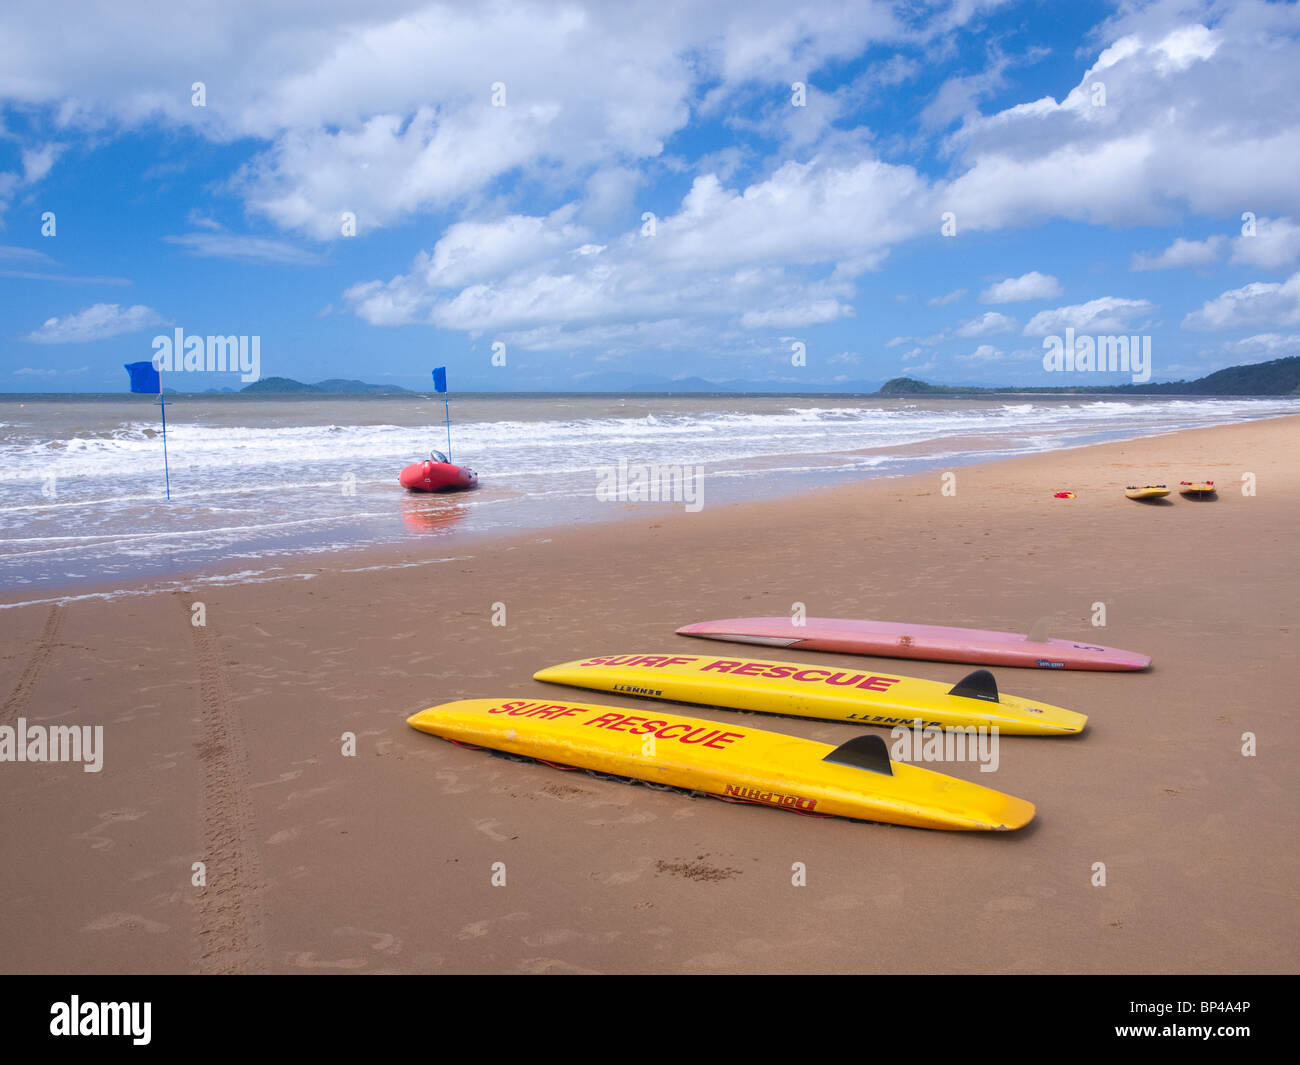 Surf rescue surfboards on South Mission Beach, Queensland, Australia. Stock Photo